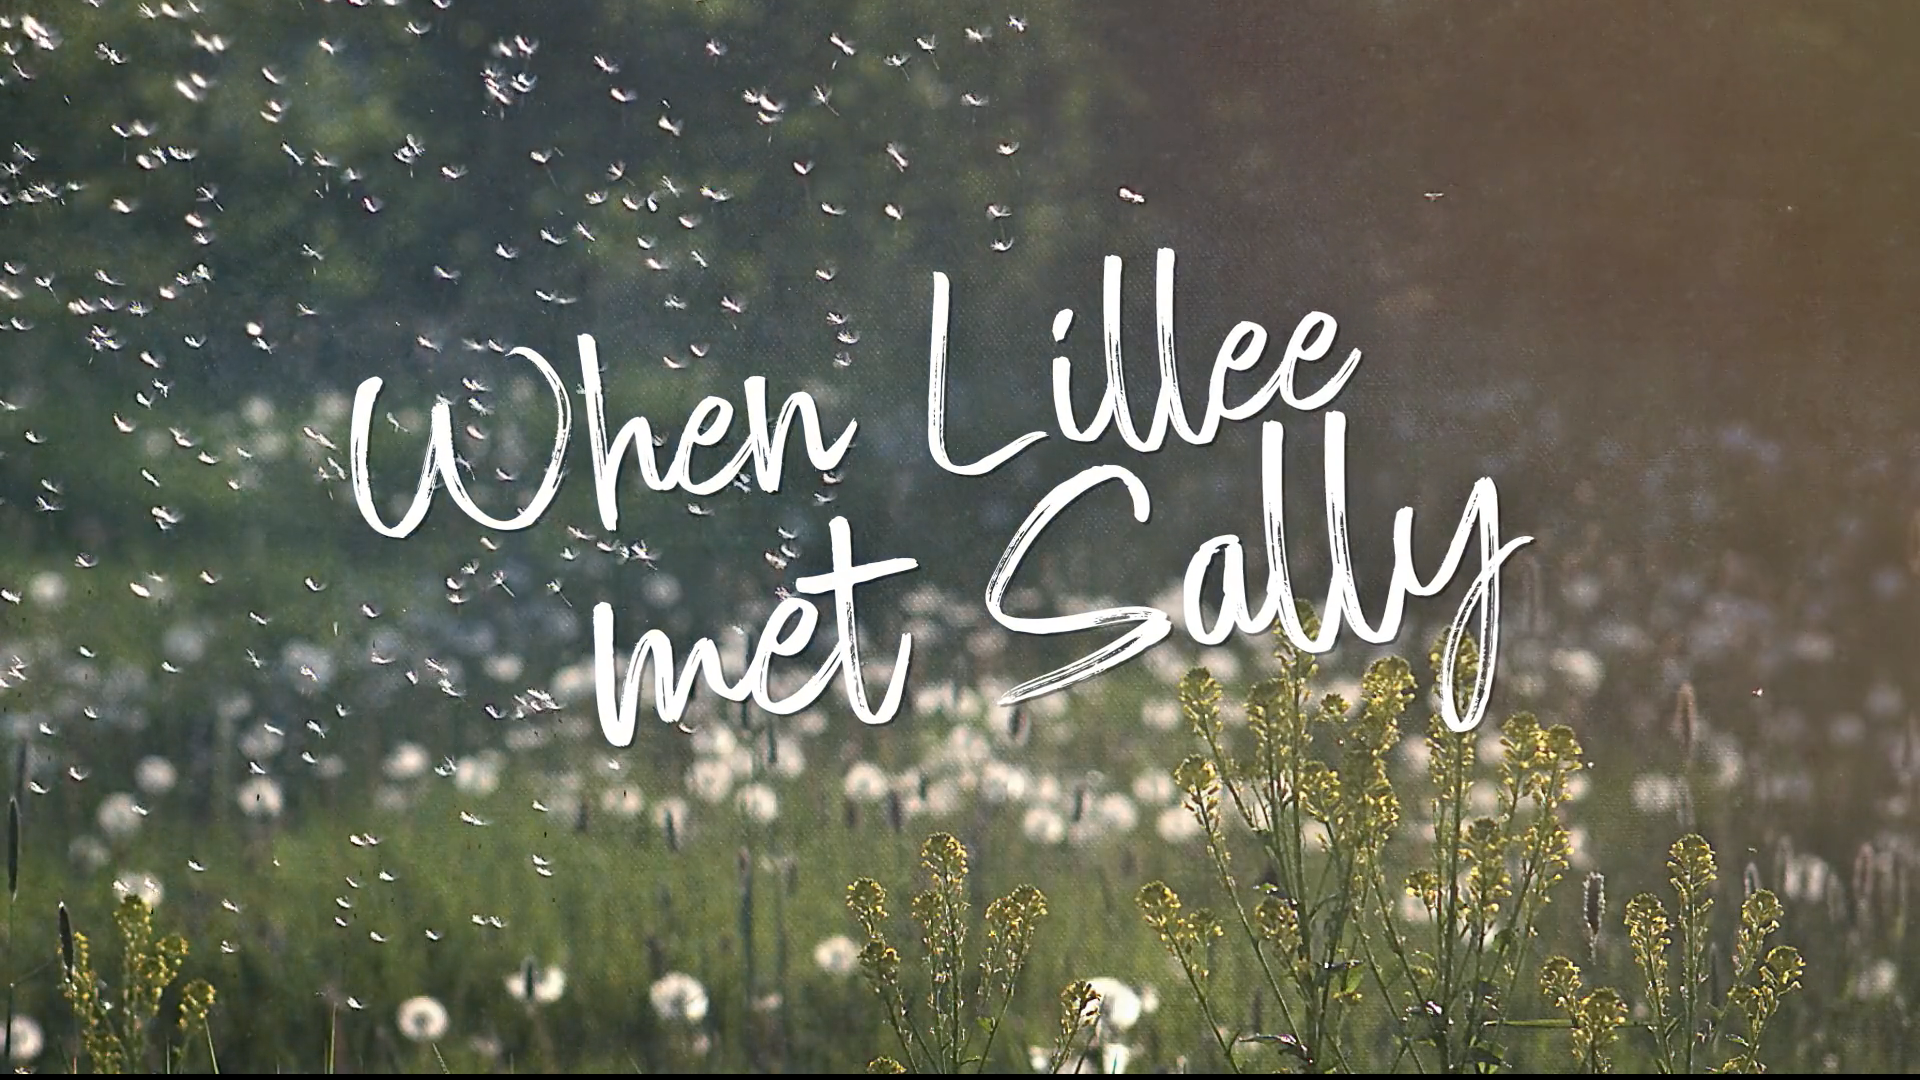 Text: When Lillee met Sally, pictured with a field of dandelions